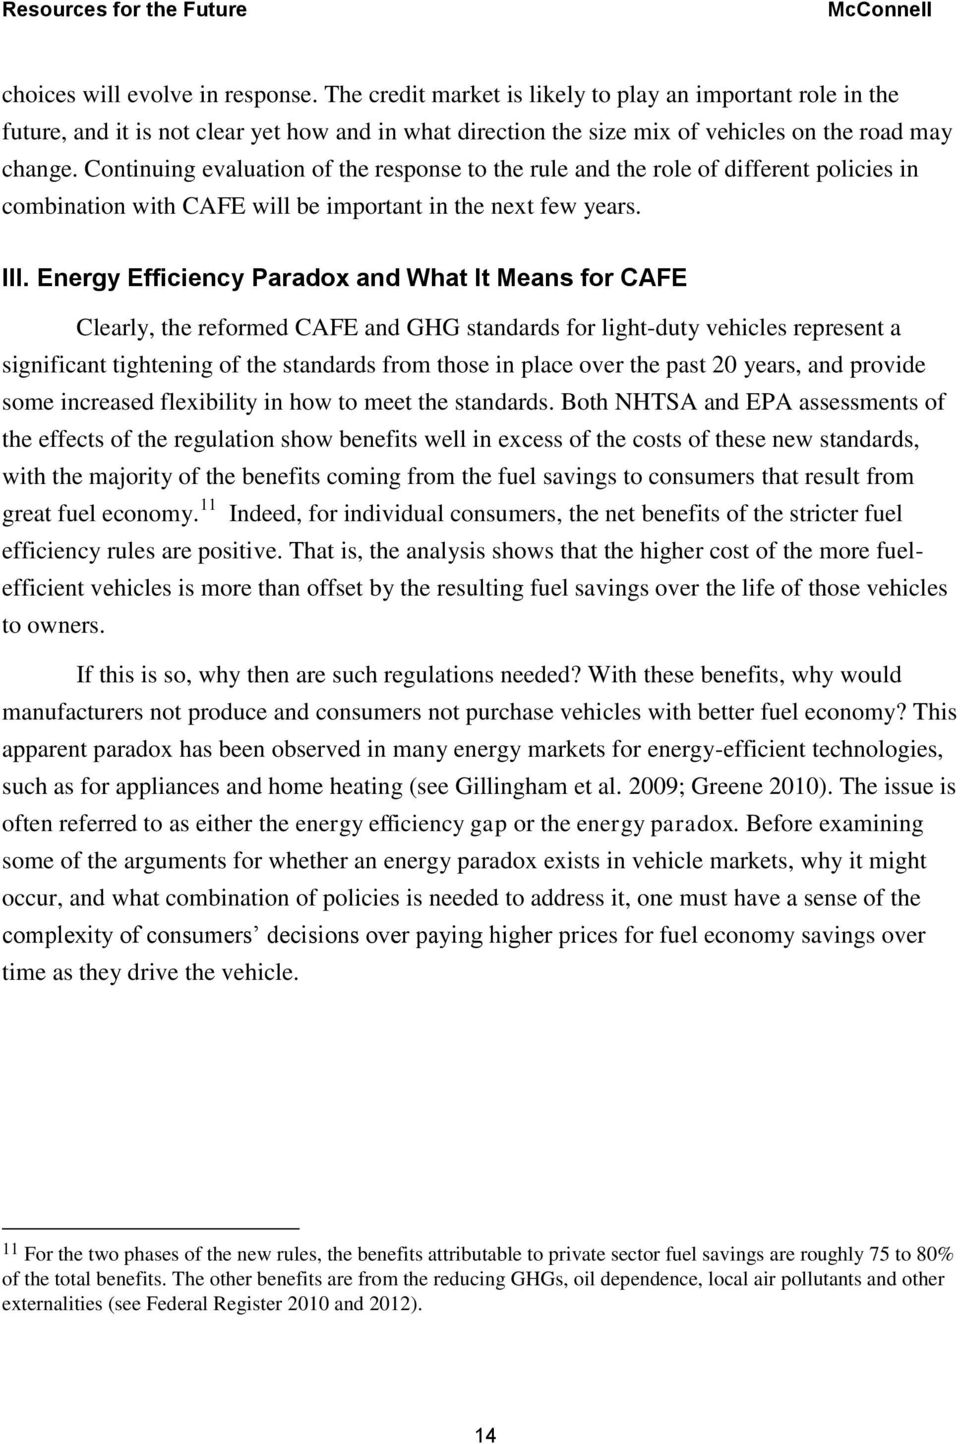 Energy Efficiency Paradox and What It Means for CAFE Clearly, the reformed CAFE and GHG standards for light-duty vehicles represent a significant tightening of the standards from those in place over